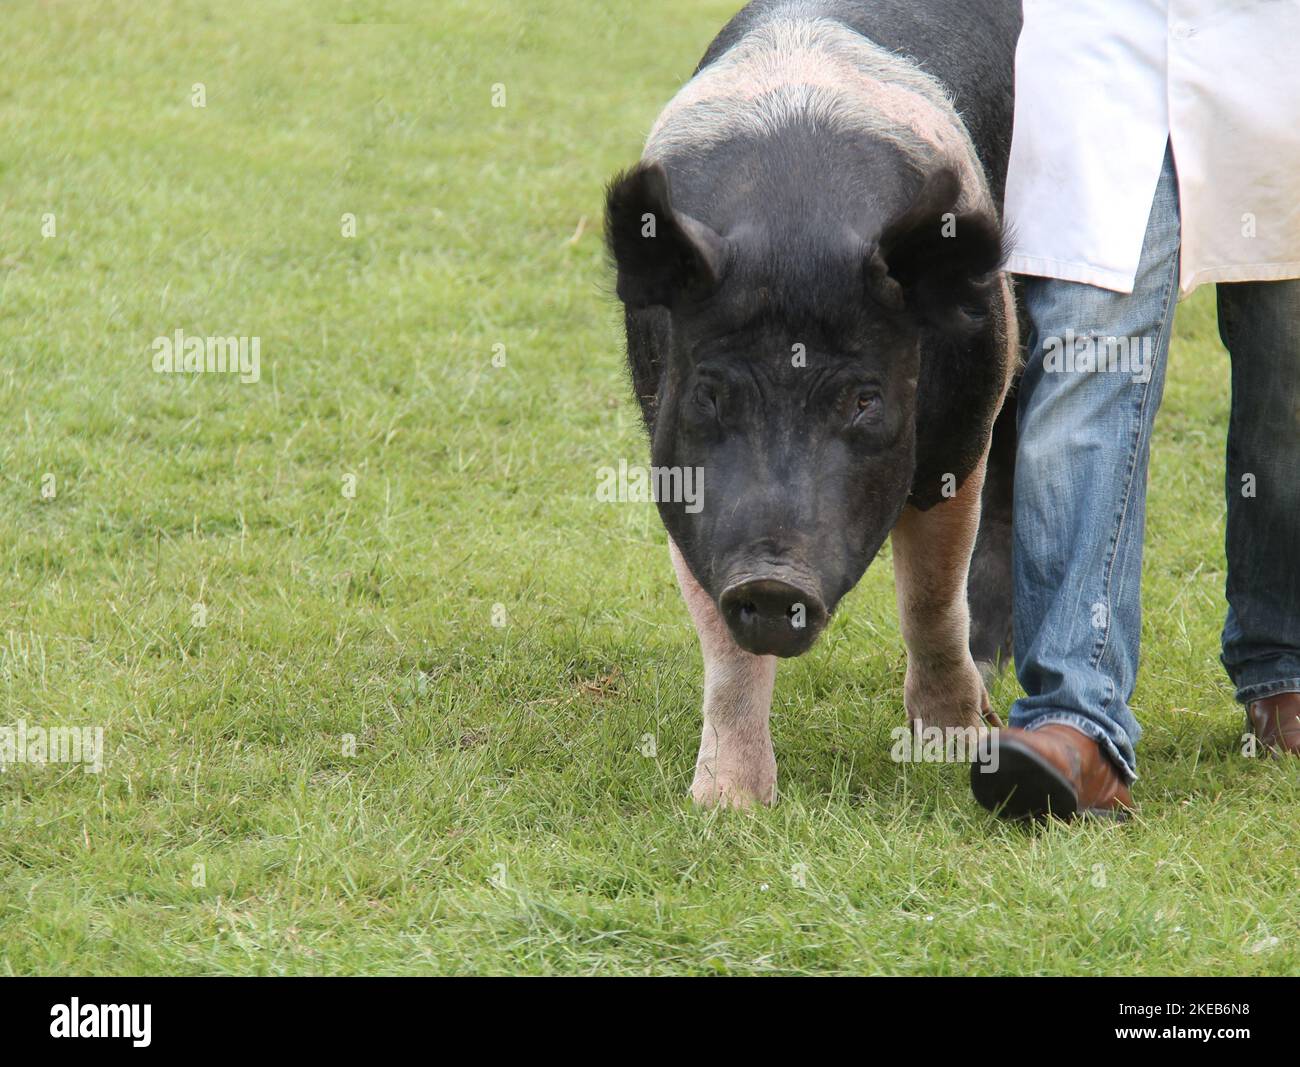 A Large Show Pig Being Walked on Fresh Grass. Stock Photo